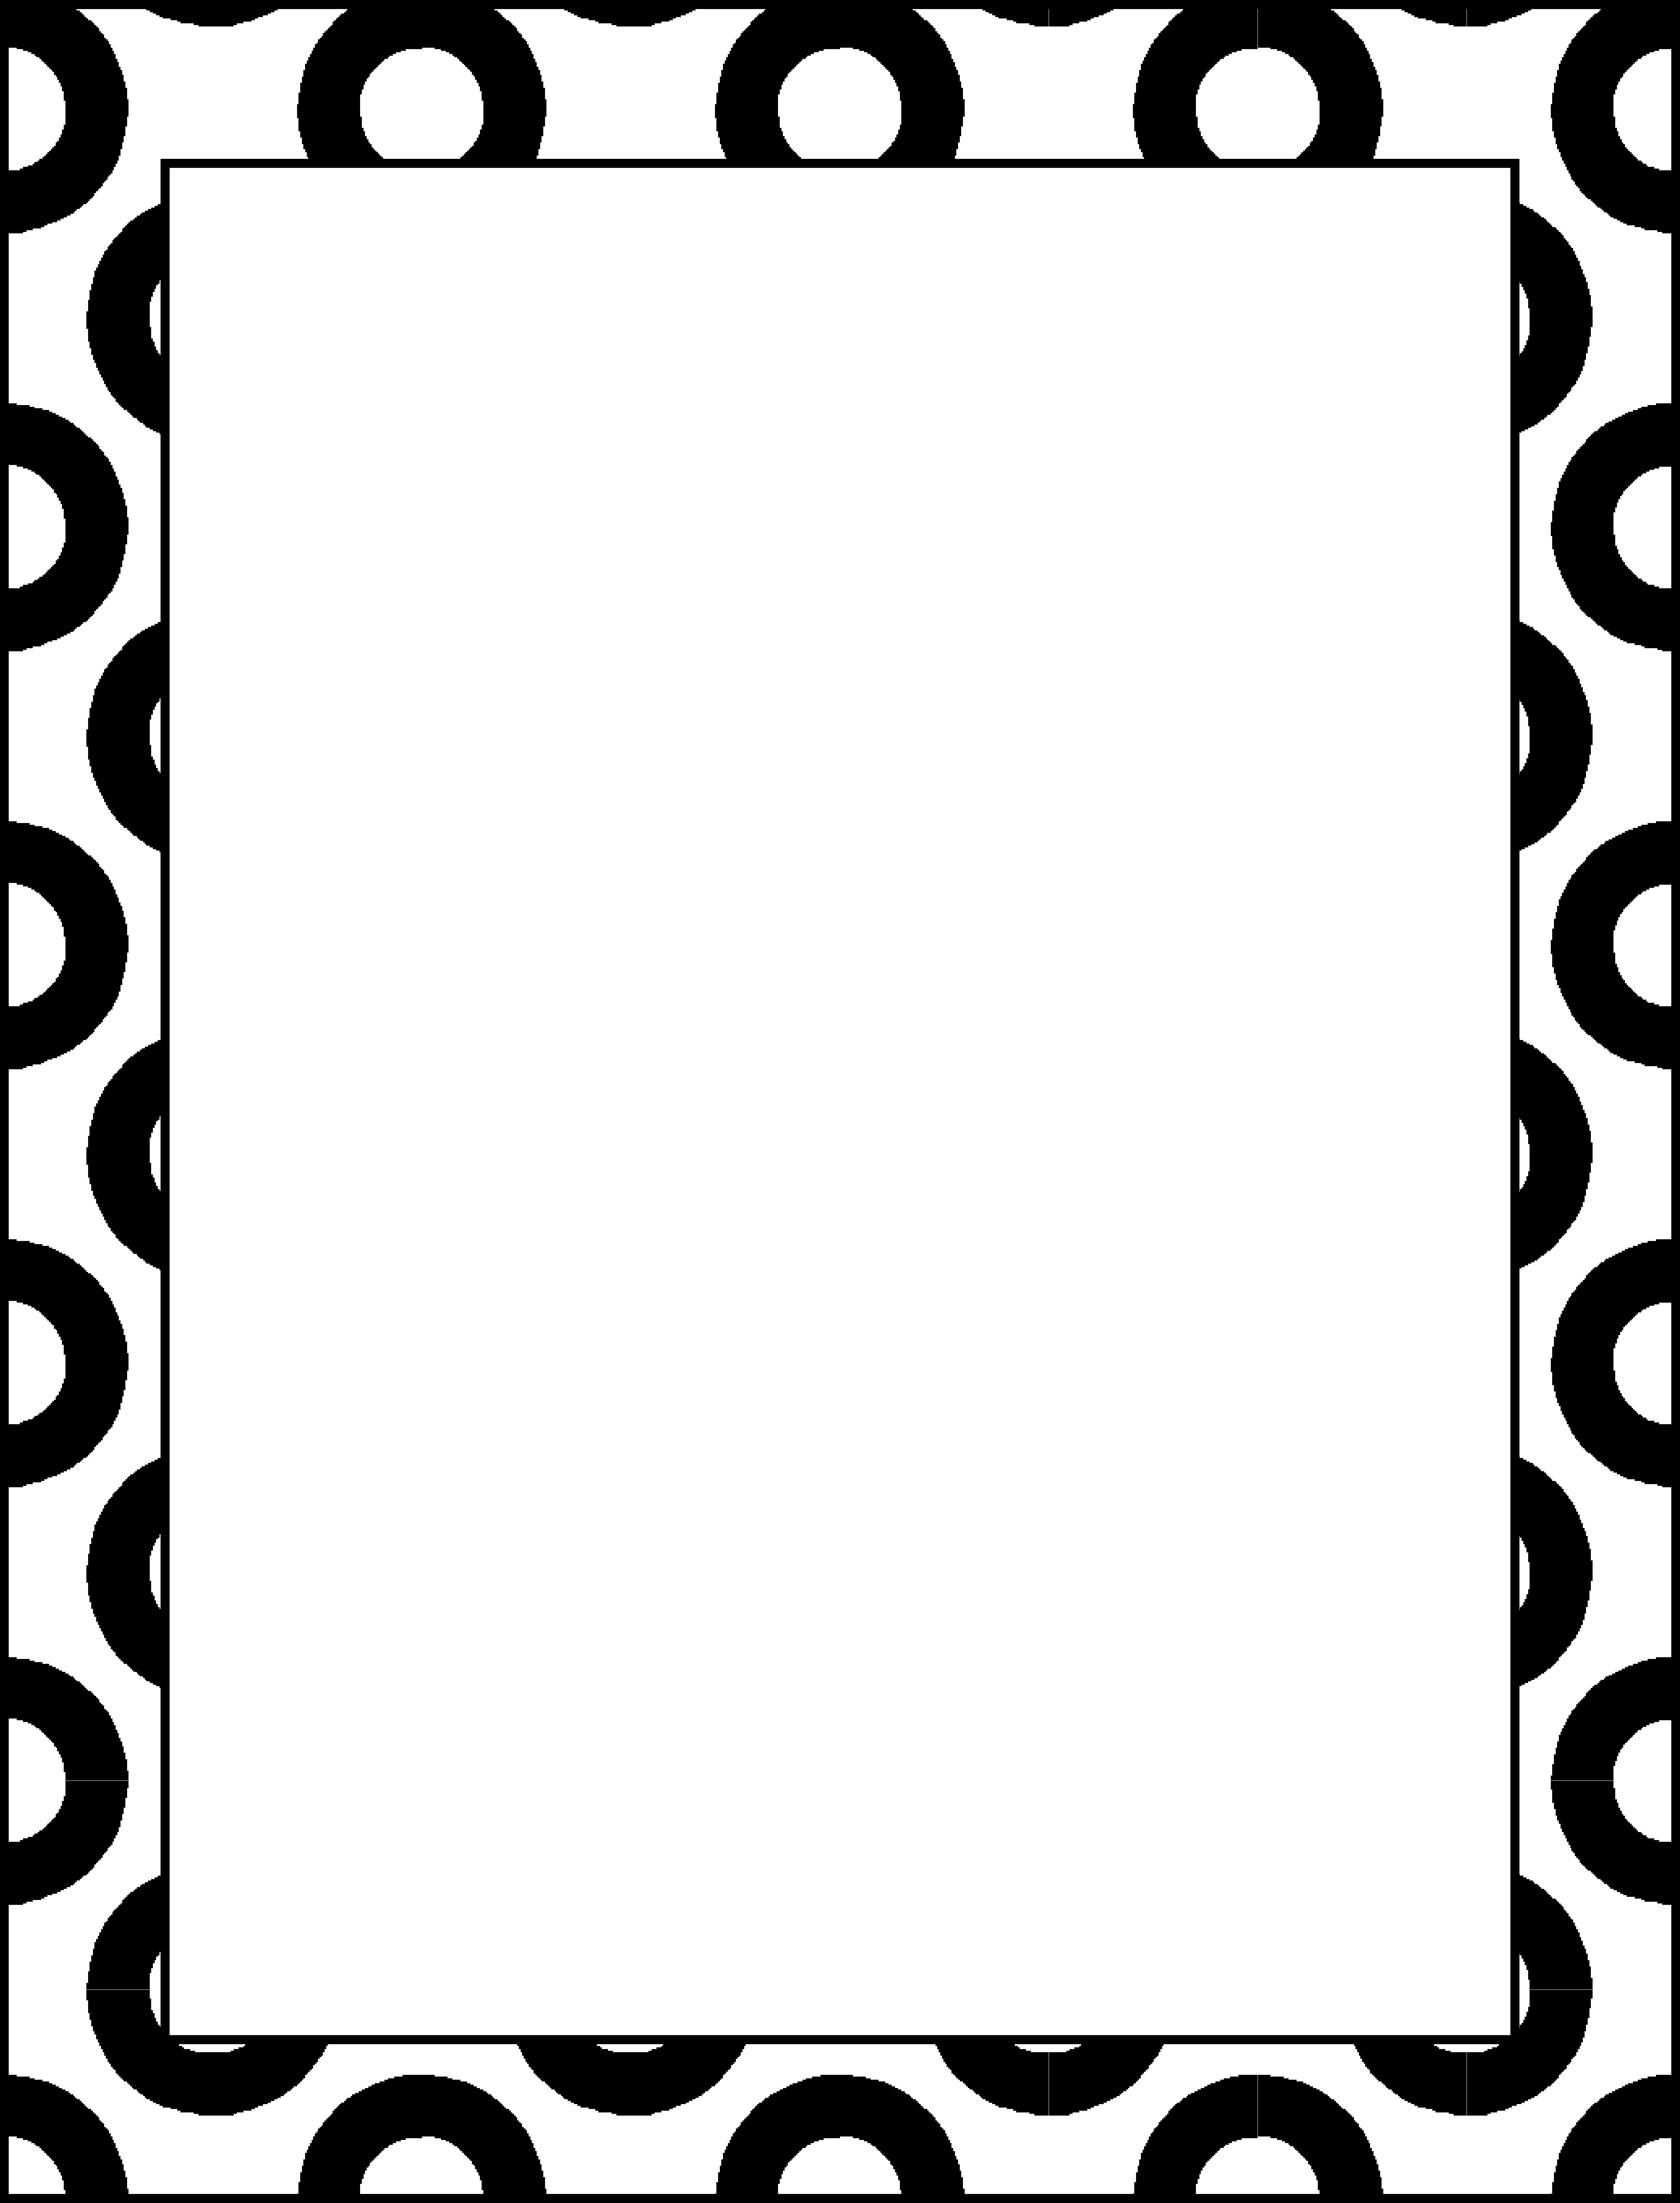 The Little Black Dress of DTP Projects: Elegant BW Borders - 2014 